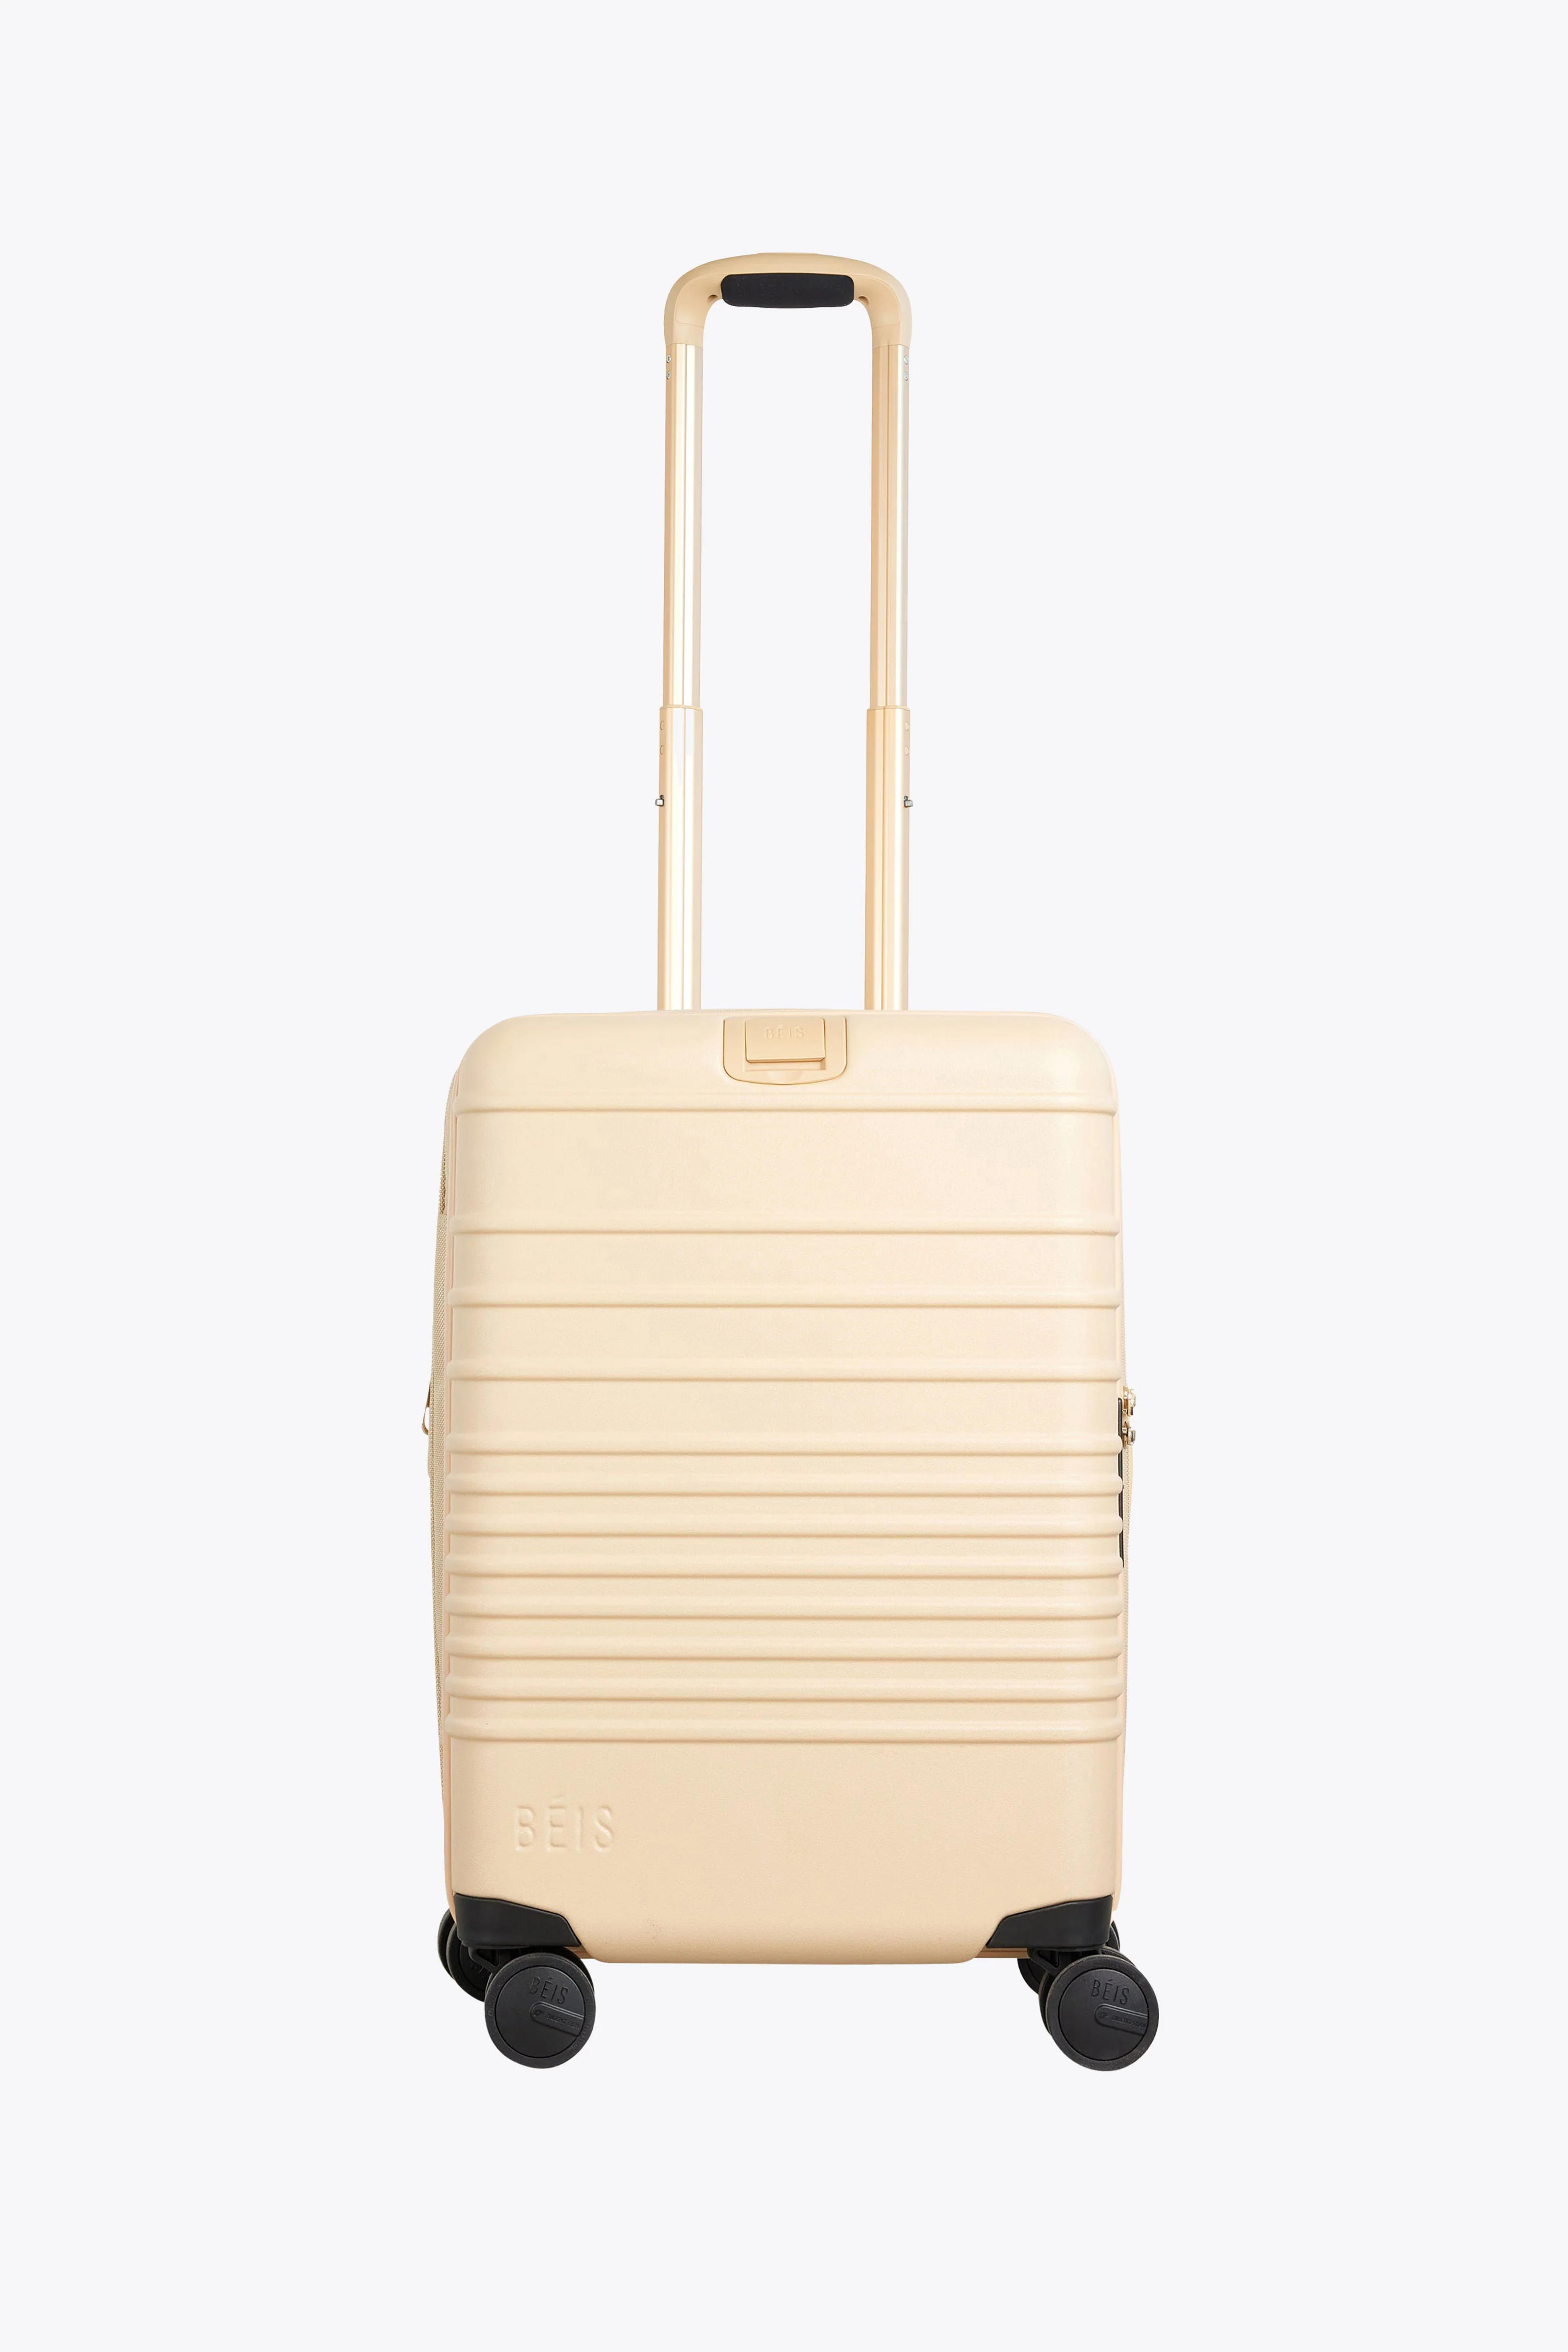 Béis 'The Carry-On Roller' in Beige - 21" Carry On Rolling Luggage